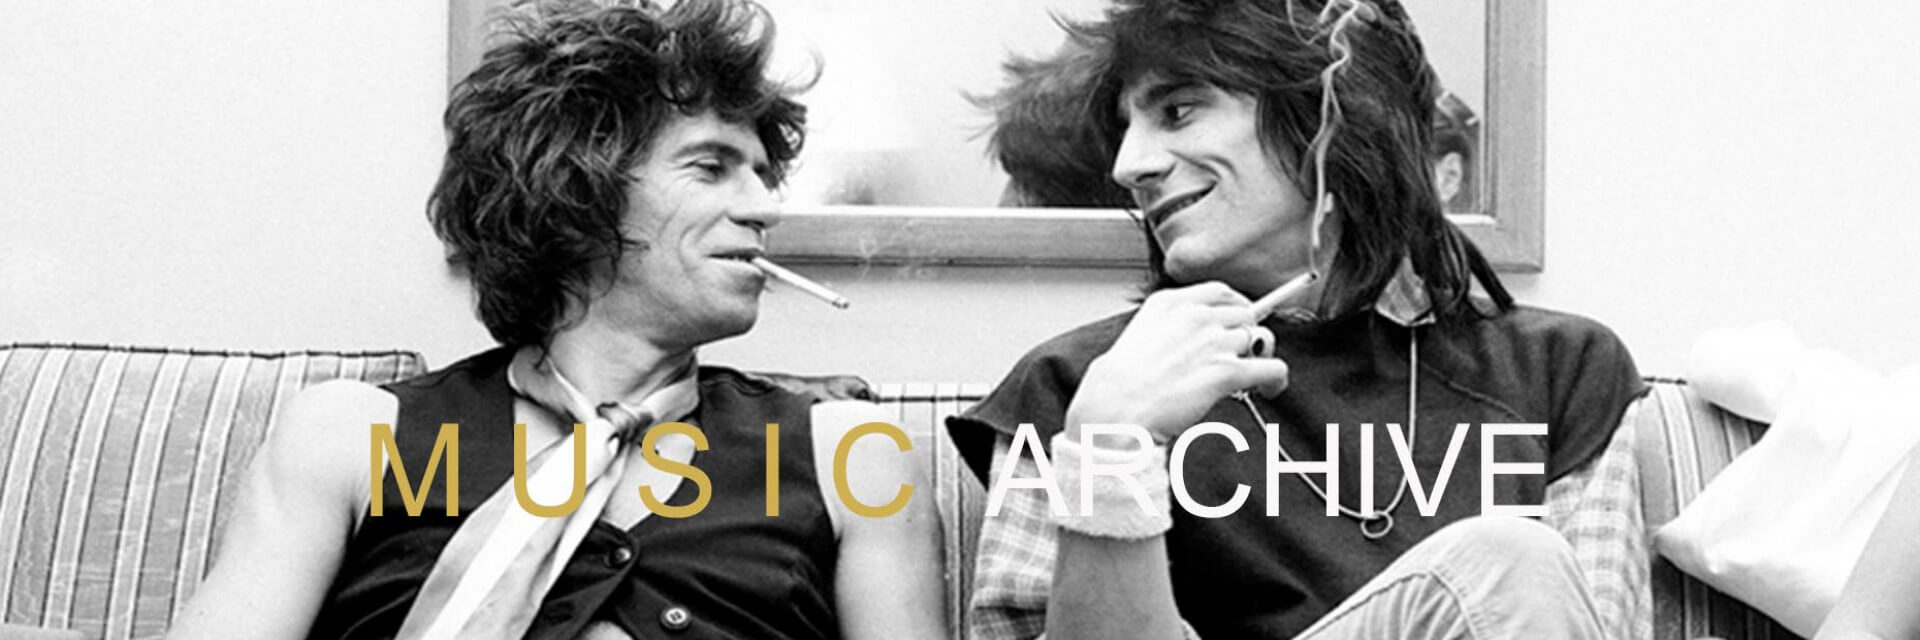 Rolling Stones band members Keith Richards and Ronnie Wood enjoy a smoke and a chat on a sofa in New York 1978.  They were promoting their side band New Barbarians. Photo by Michael Putland limited edition estate prints available from Galerie Prints.